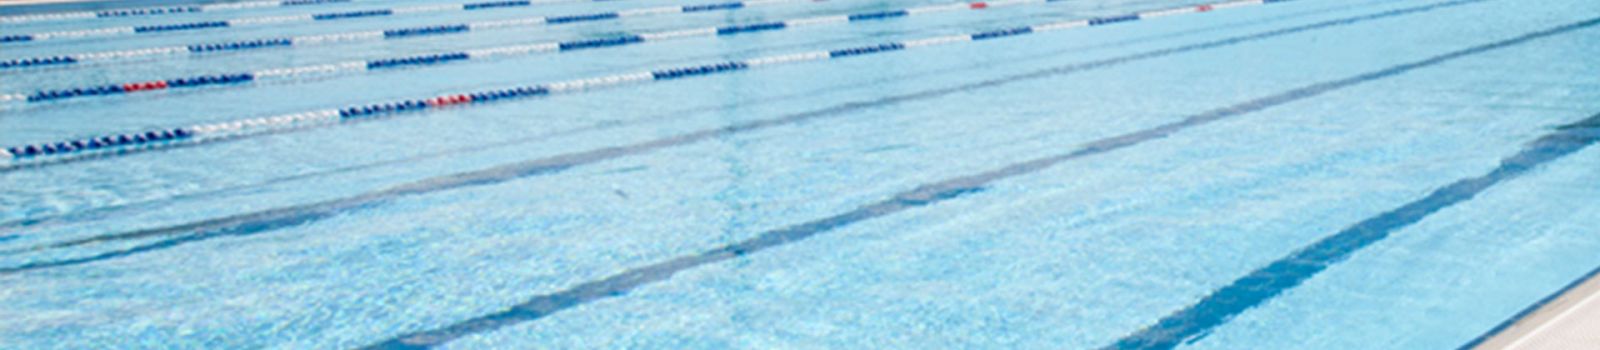 Image of a swimming pool with lanes banner image